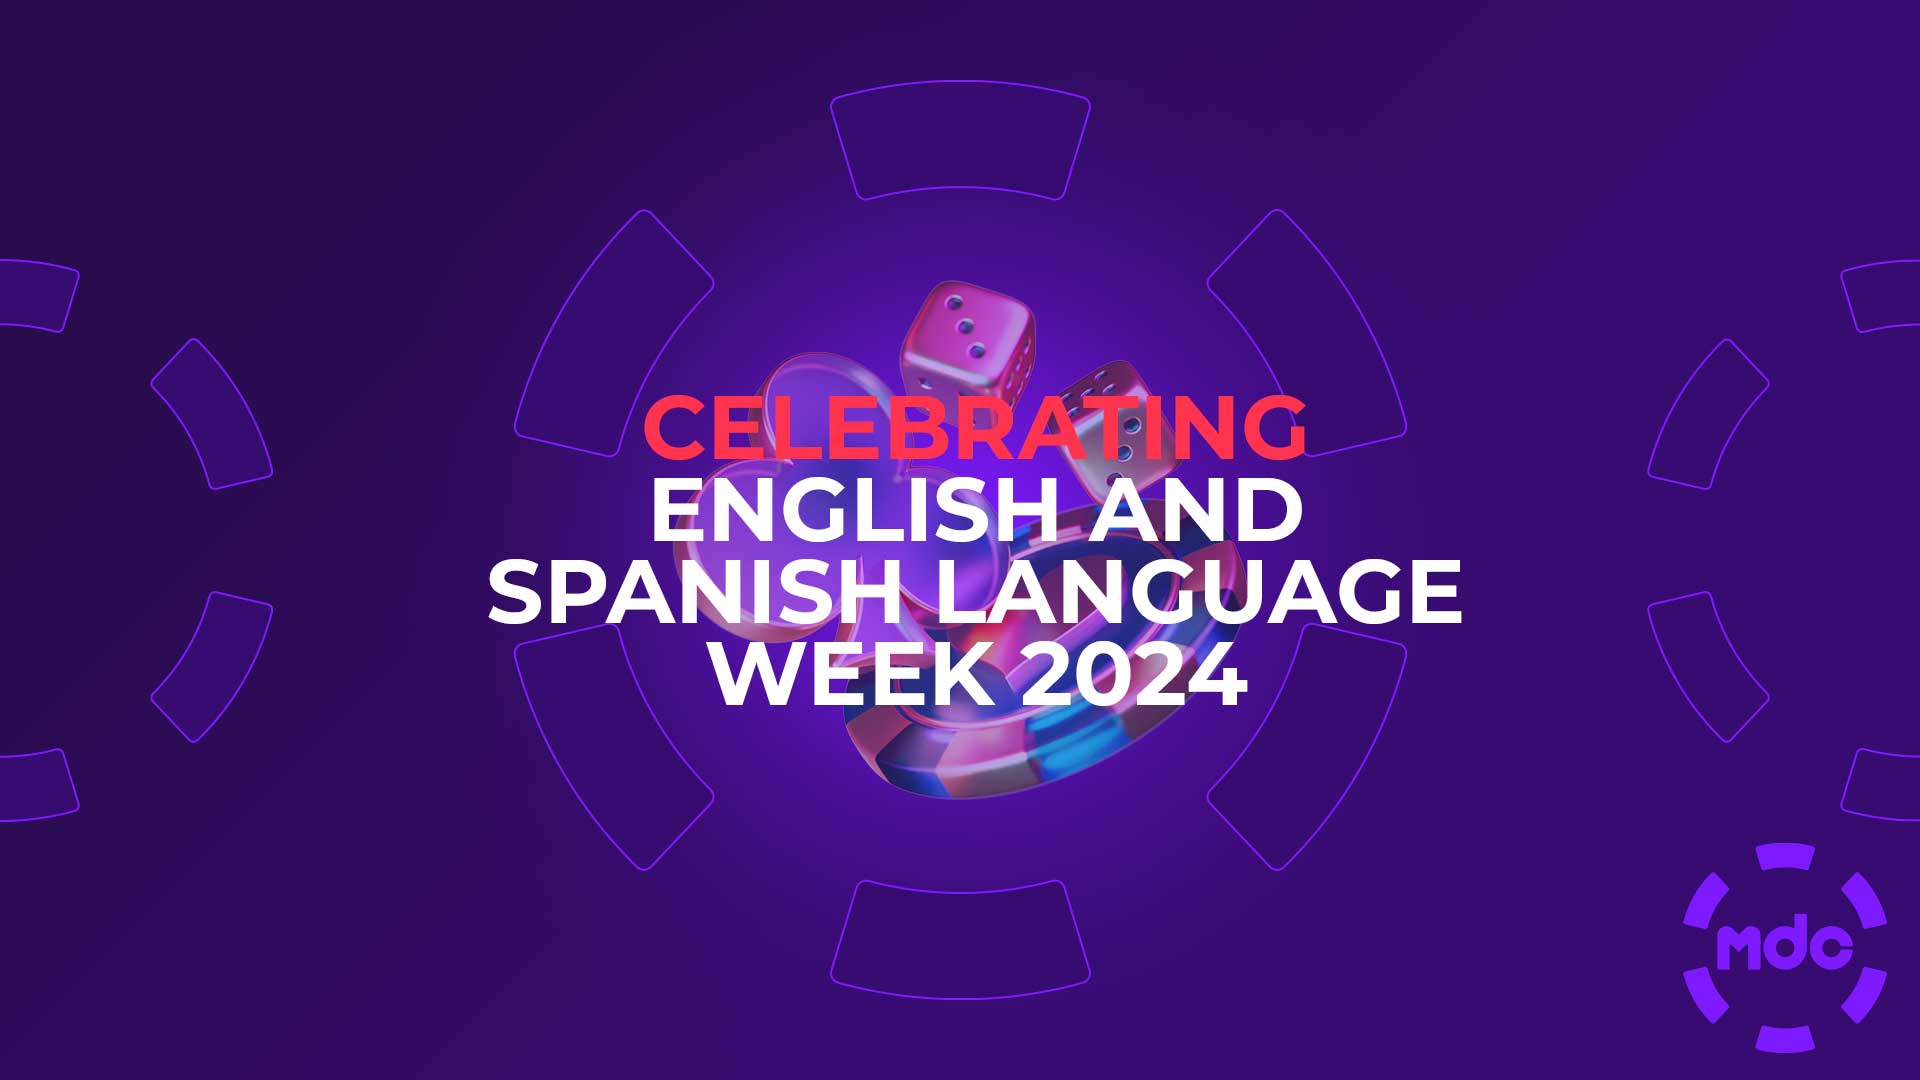 Celebrating English and Spanish Language Week 2024: The Battle of Dialects in Casino Lingo